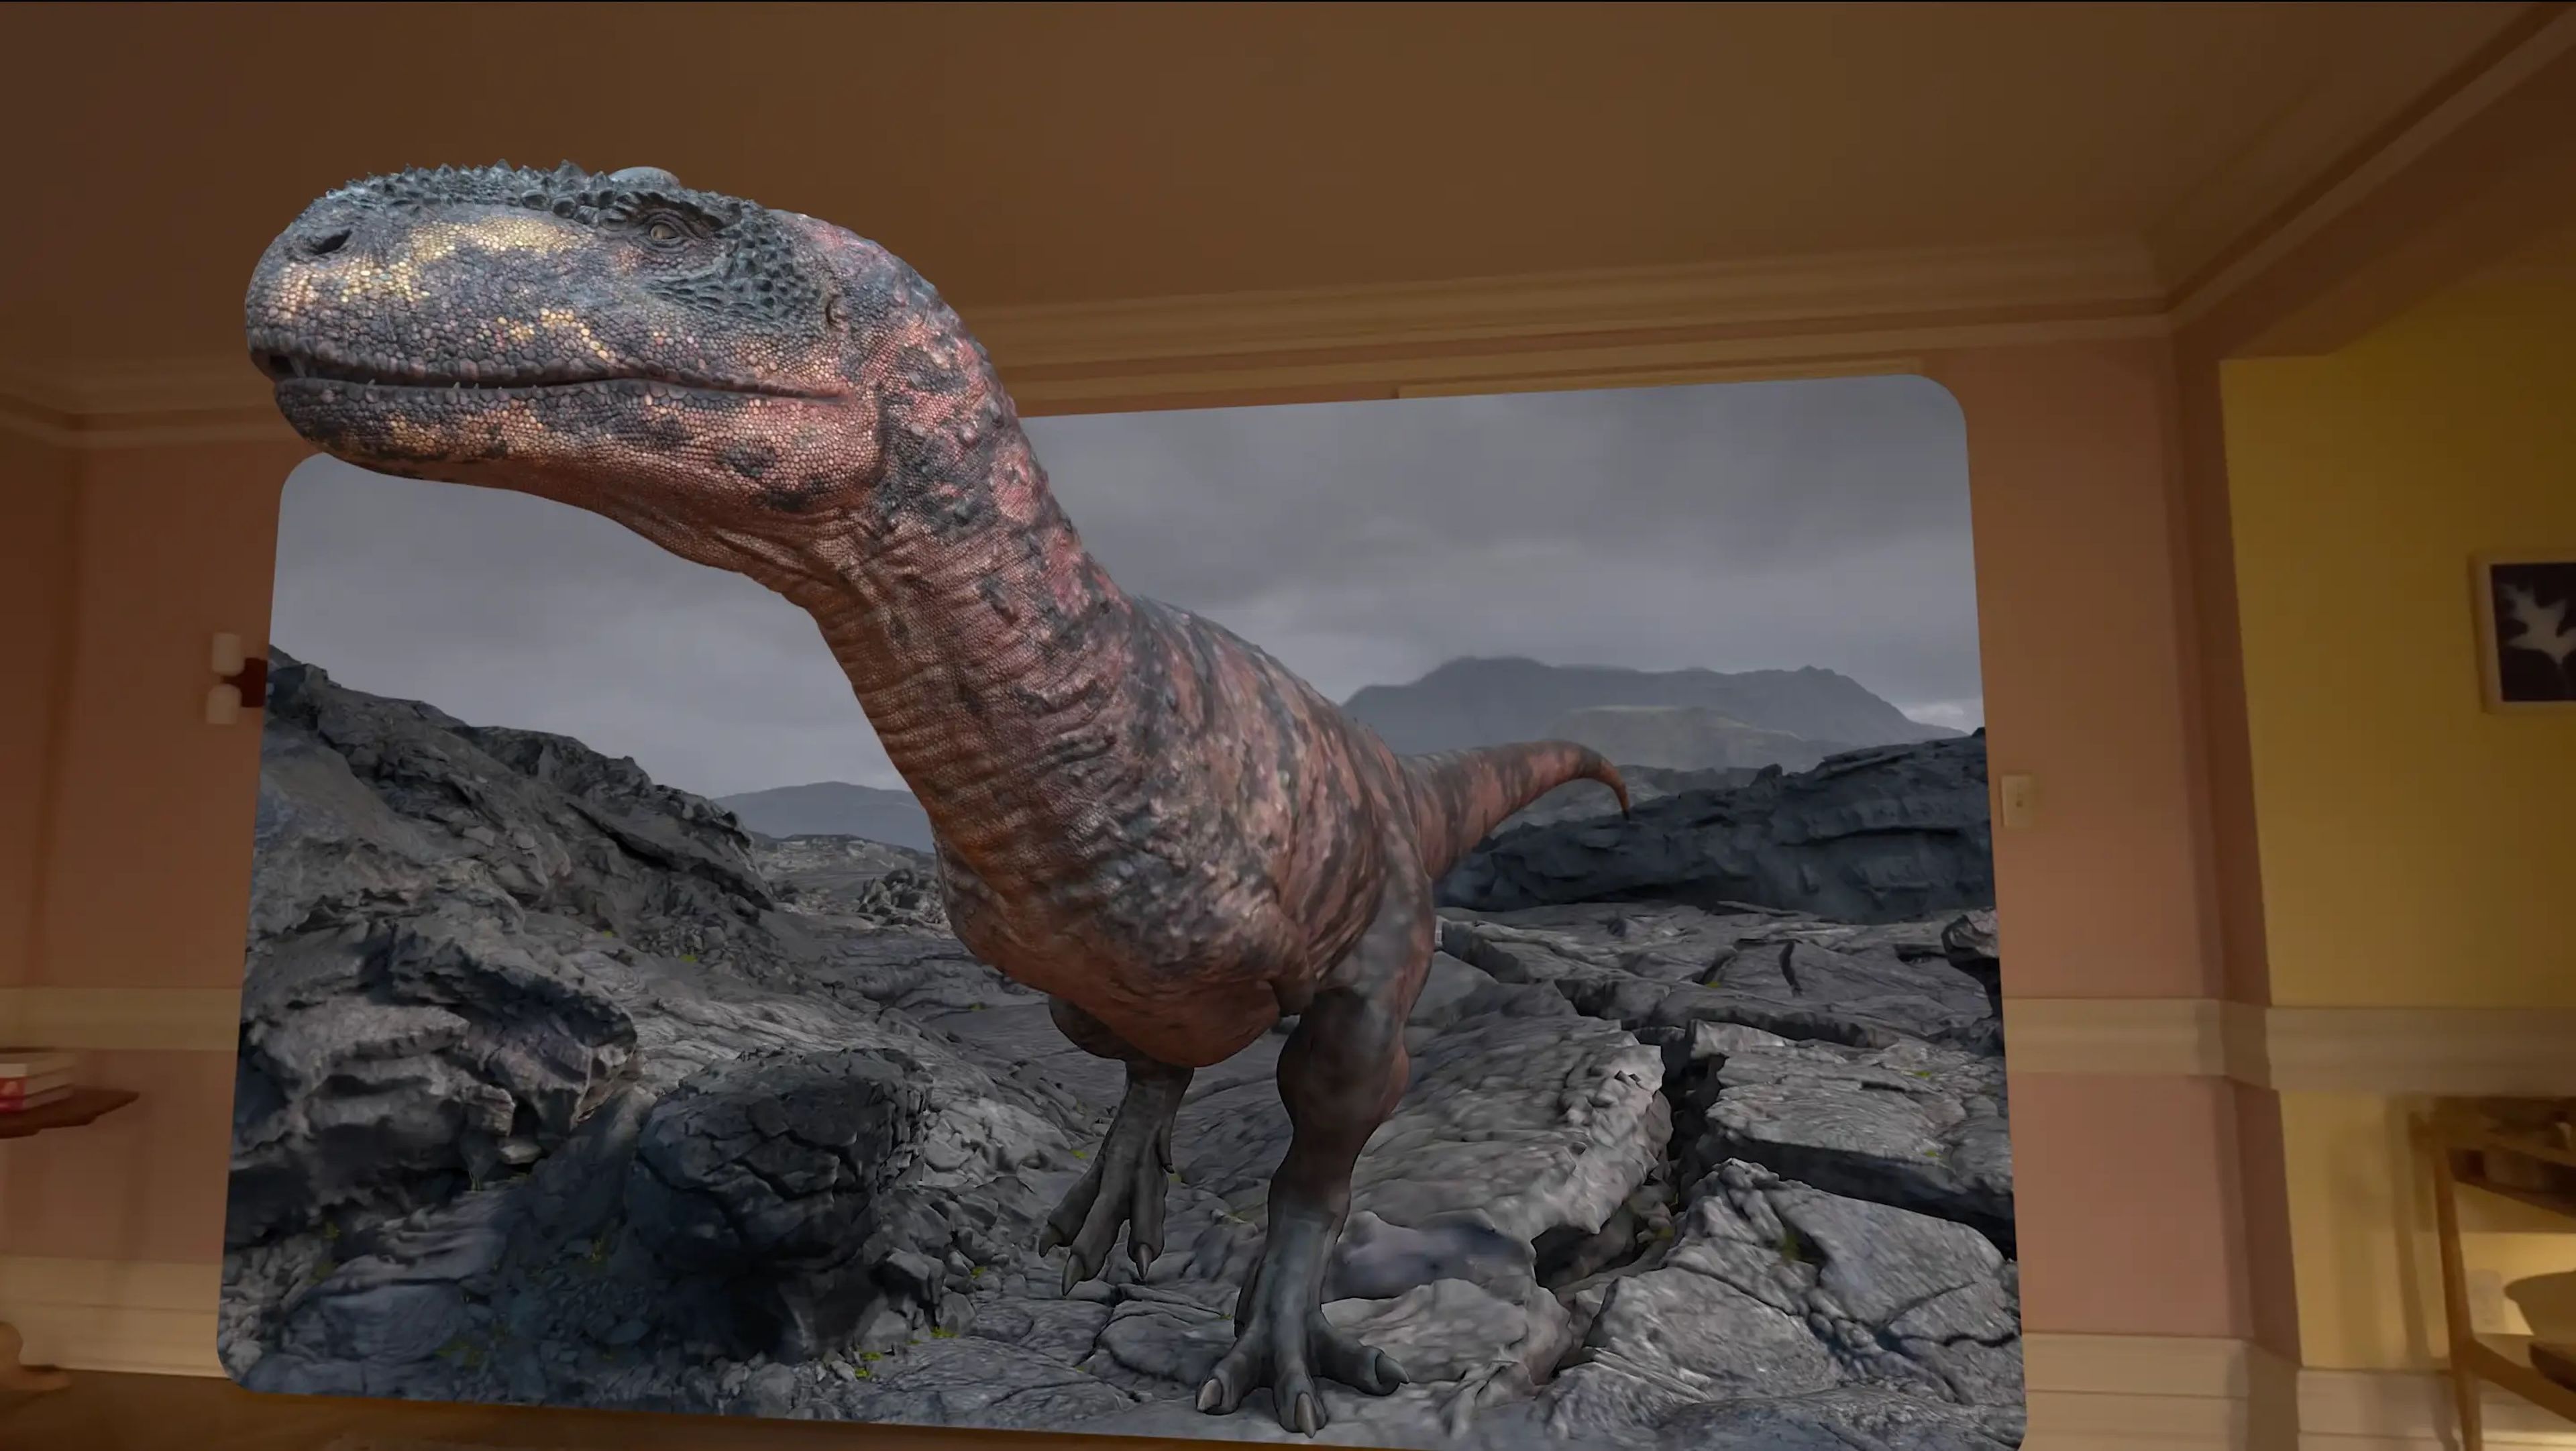 An image of "Encountering Dinosaurs" on the Vision Pro.